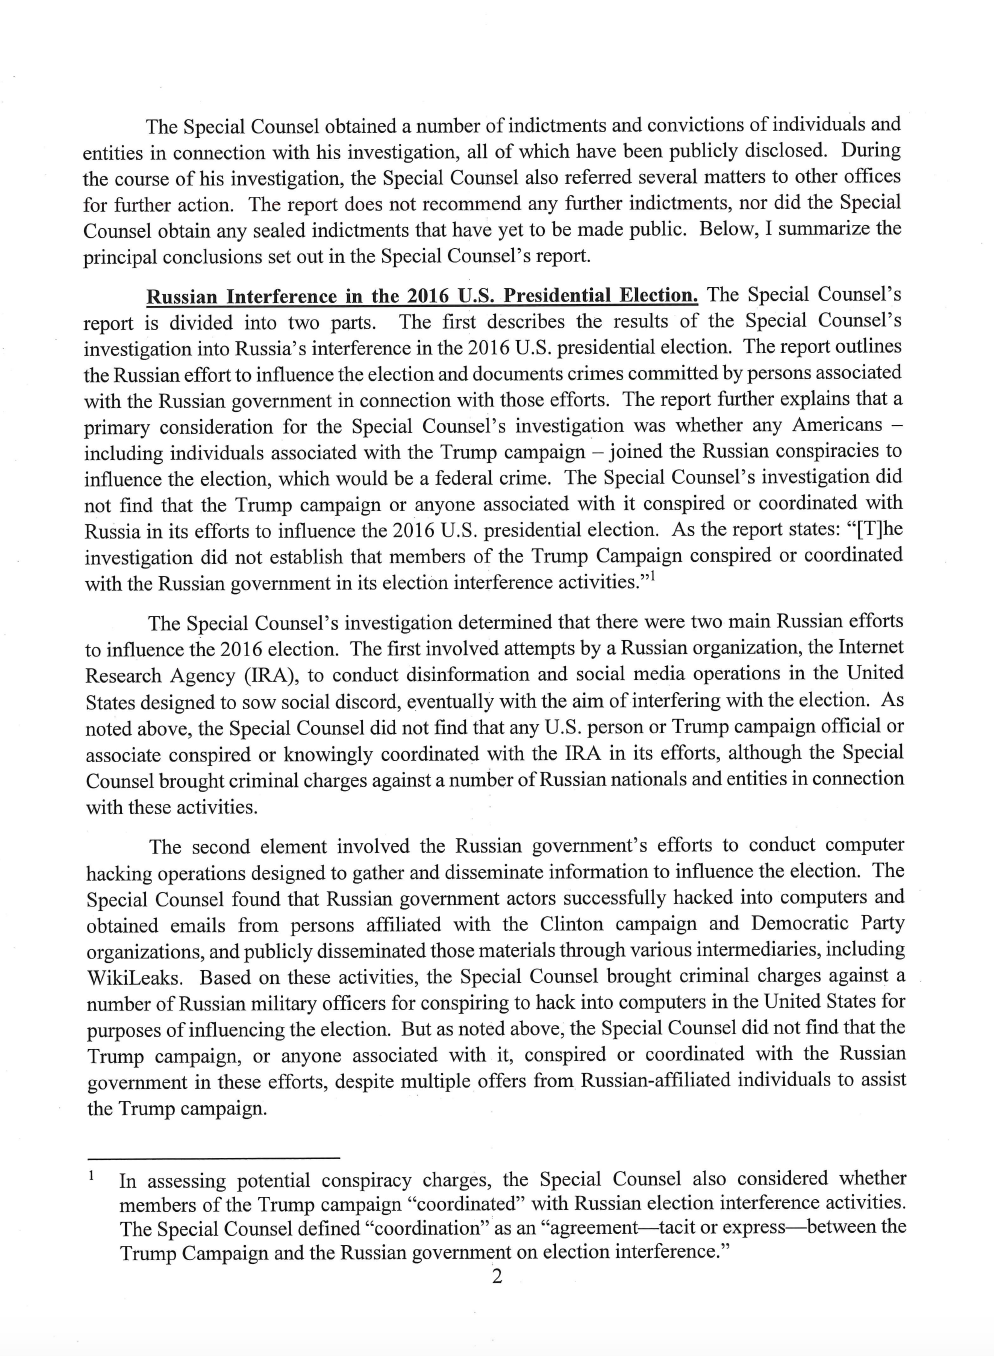 Page 2 of Attorney General William Barr's letter to Congress on Special Counsel Robert Mueller's report. (Department of Justice)